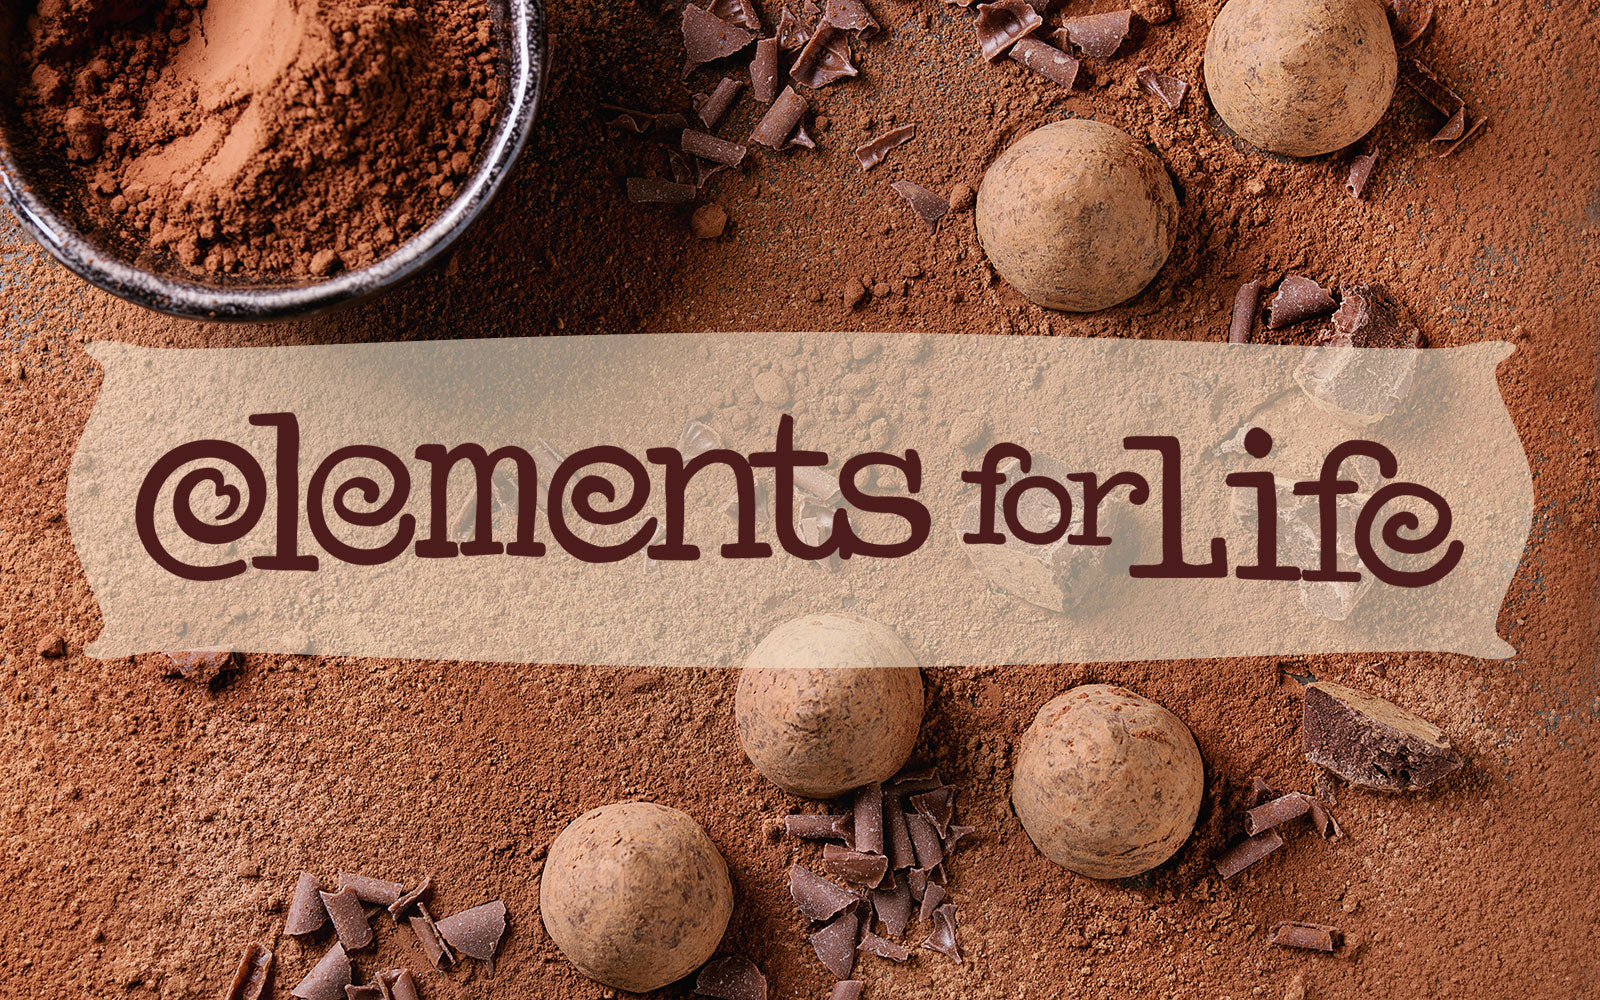 elements for life logo over chocolate scene